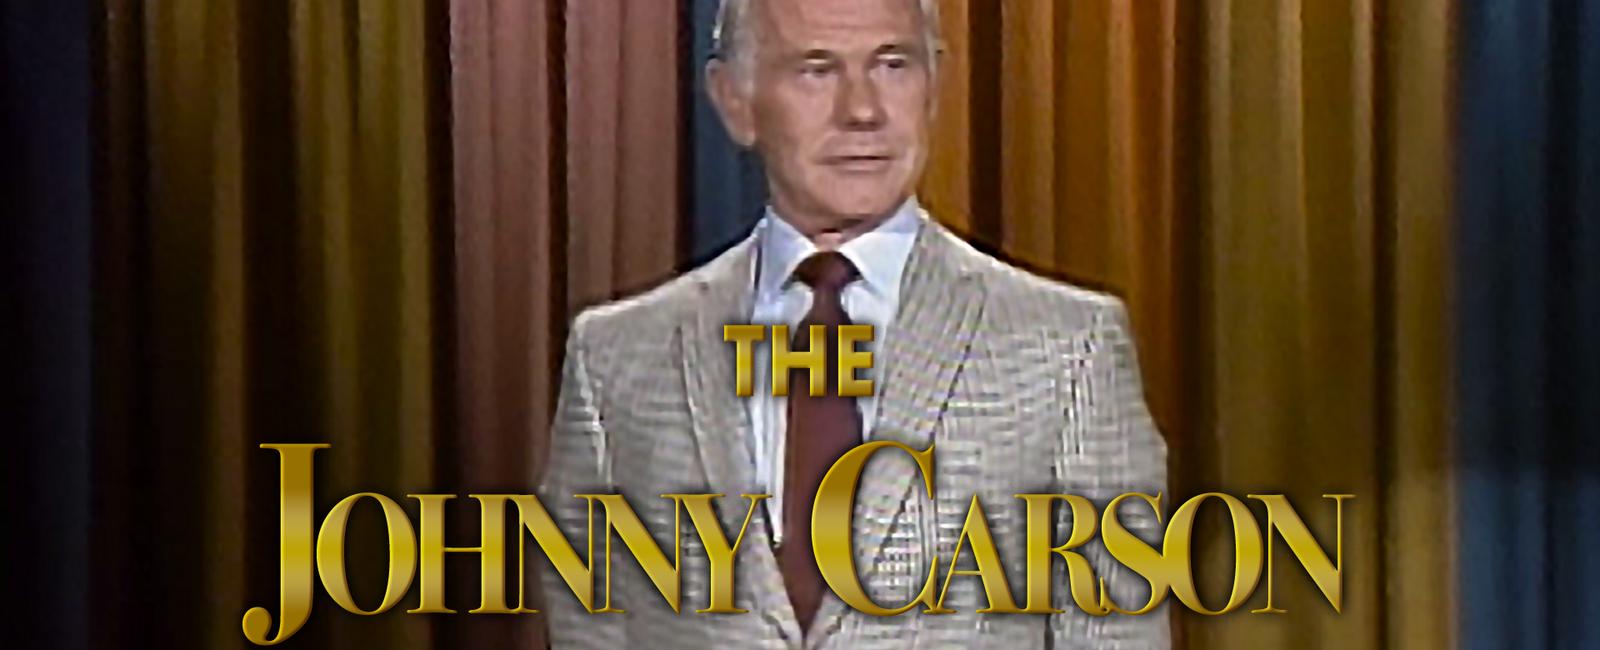 Who famously announced heeeere s johnny on the johnny carson show from the early 60s ed mcmahon